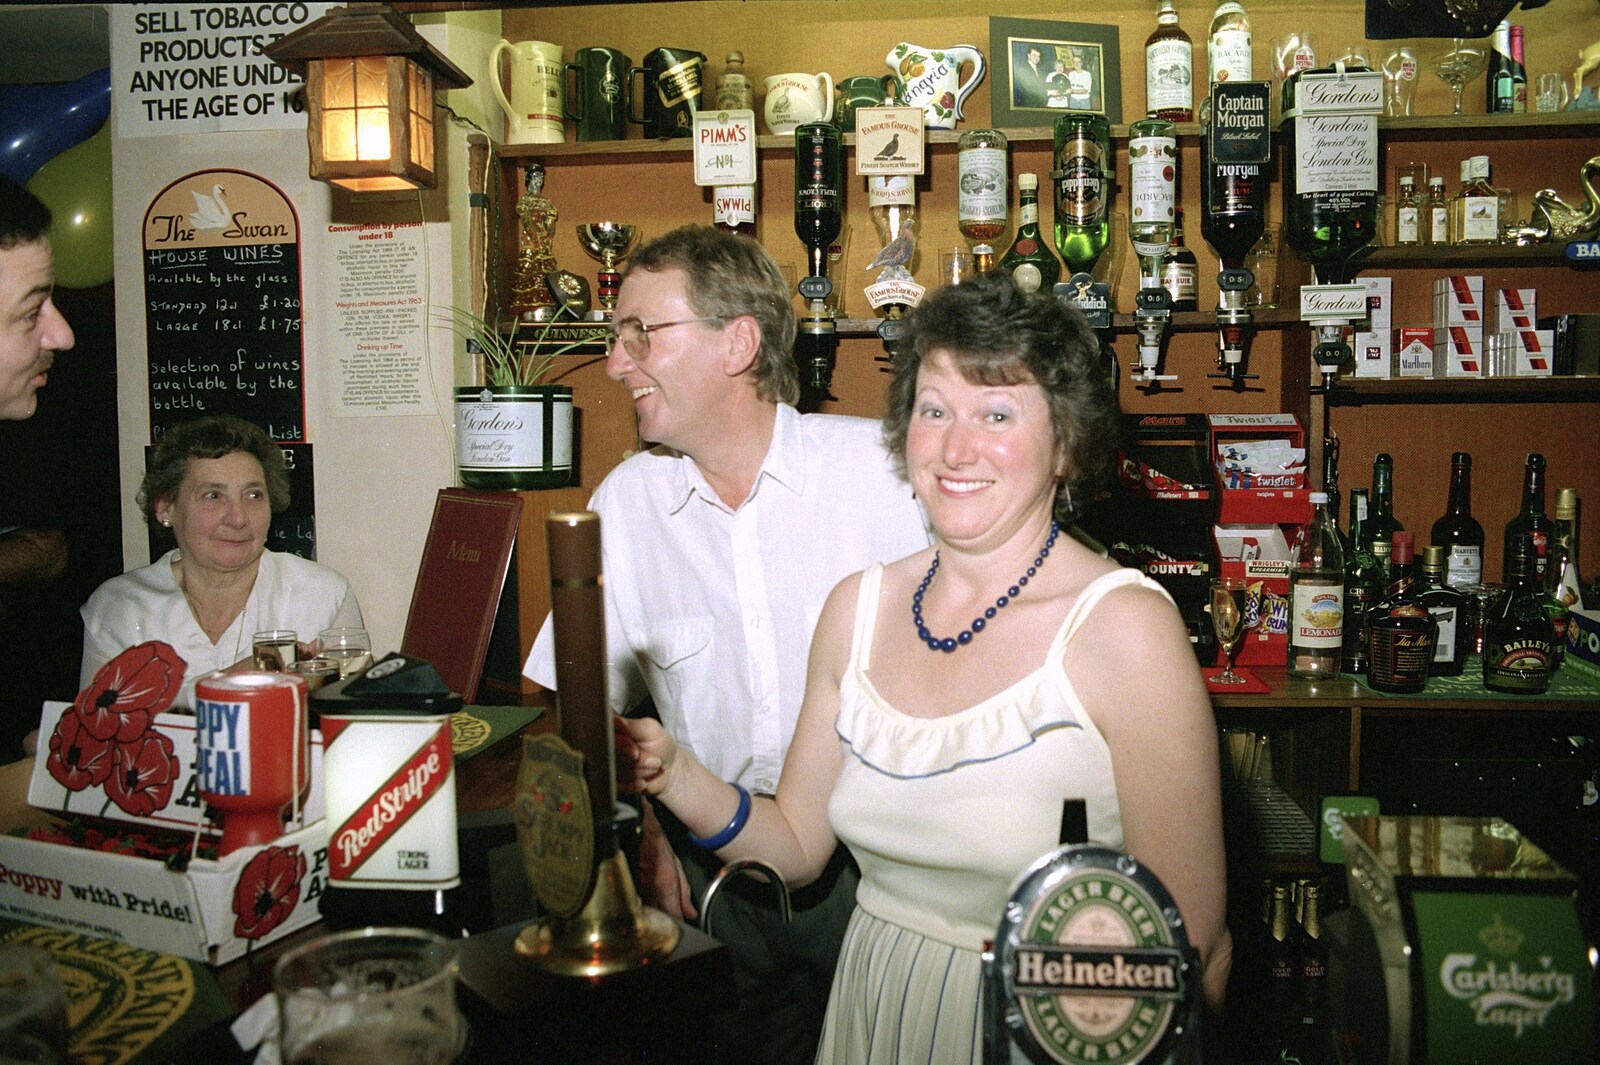 Nana, John Willy and Sylvia from A Night In The Swan Inn, Brome, Suffolk - 1st November 1993